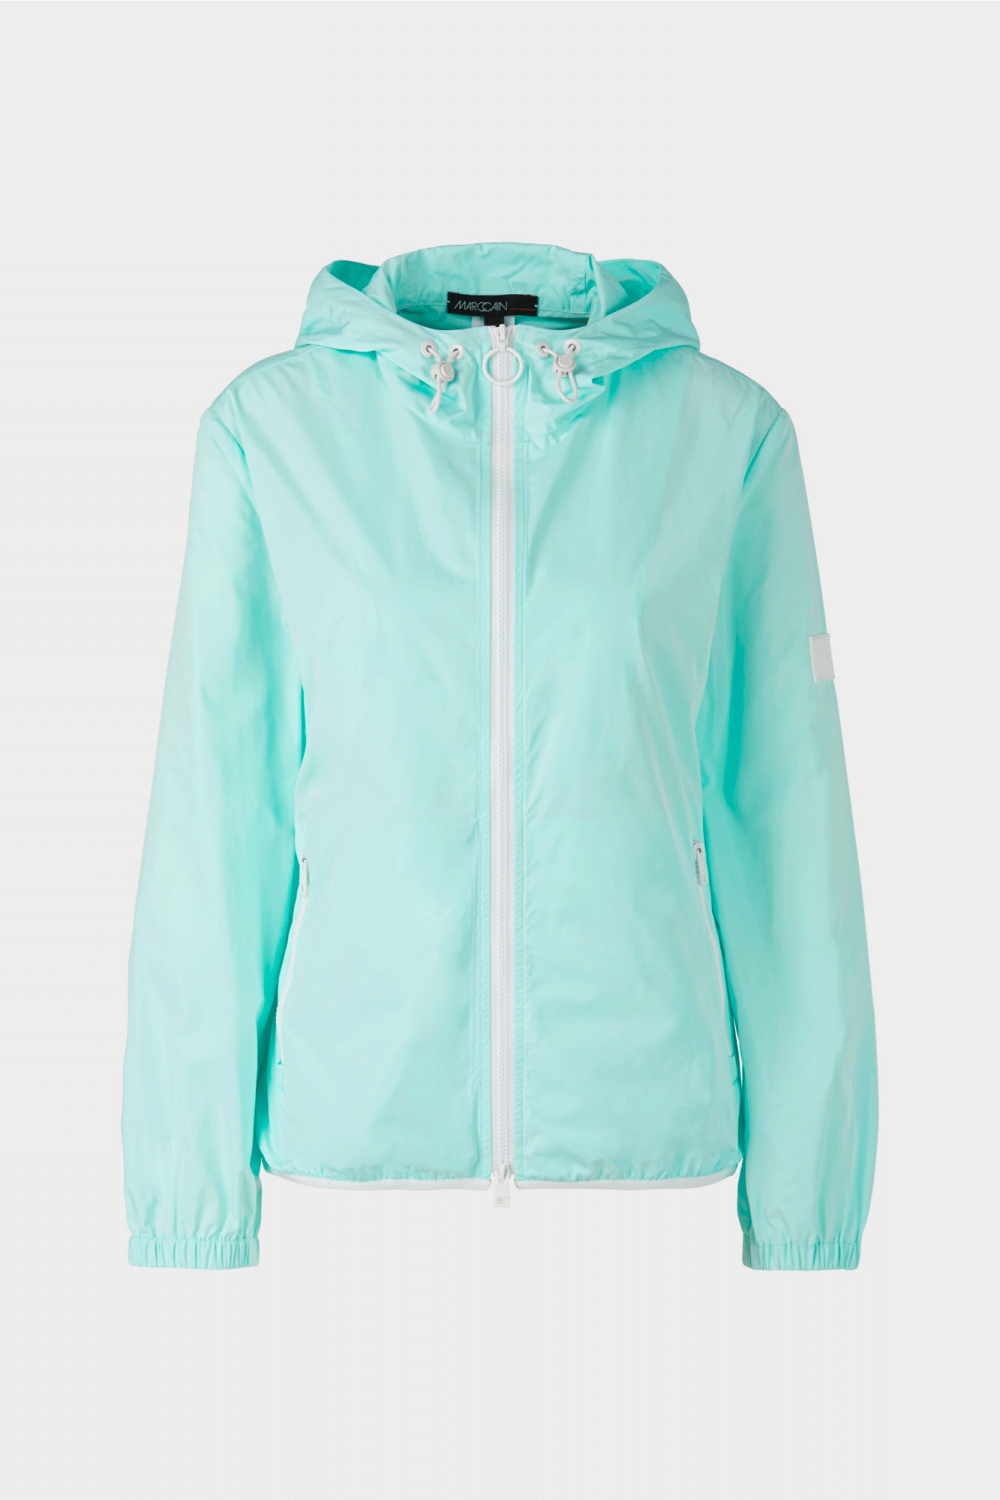 The Girl Scouts Outdoor Jacket from Marc Cain is designed to keep you comfortable and stylish whatever the weather. 